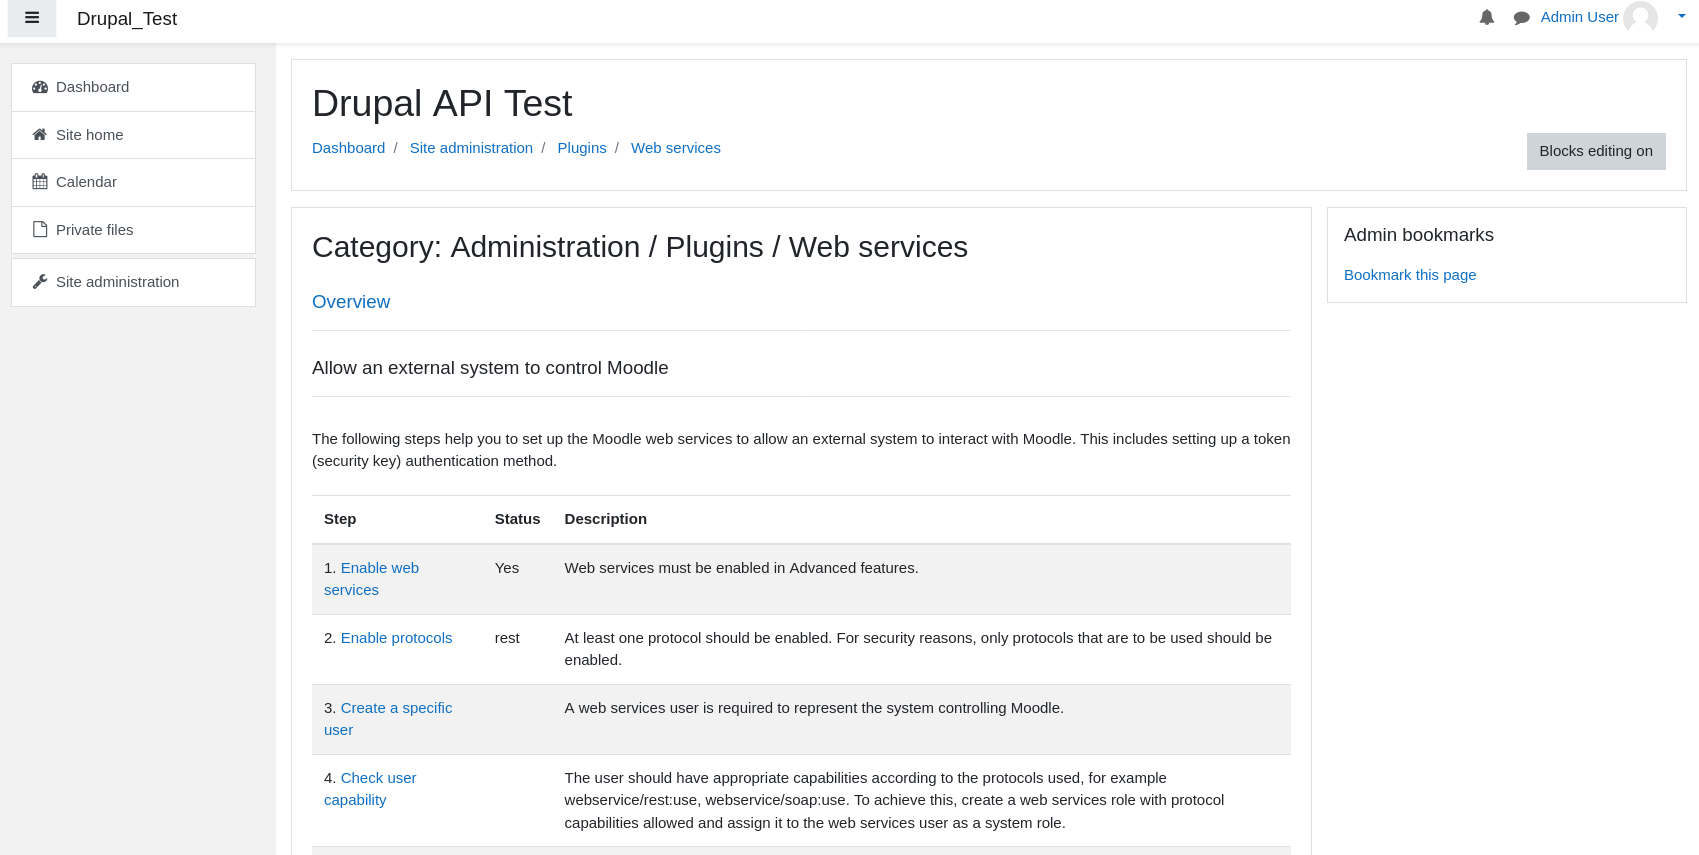  Administration / Plugins / Web services page